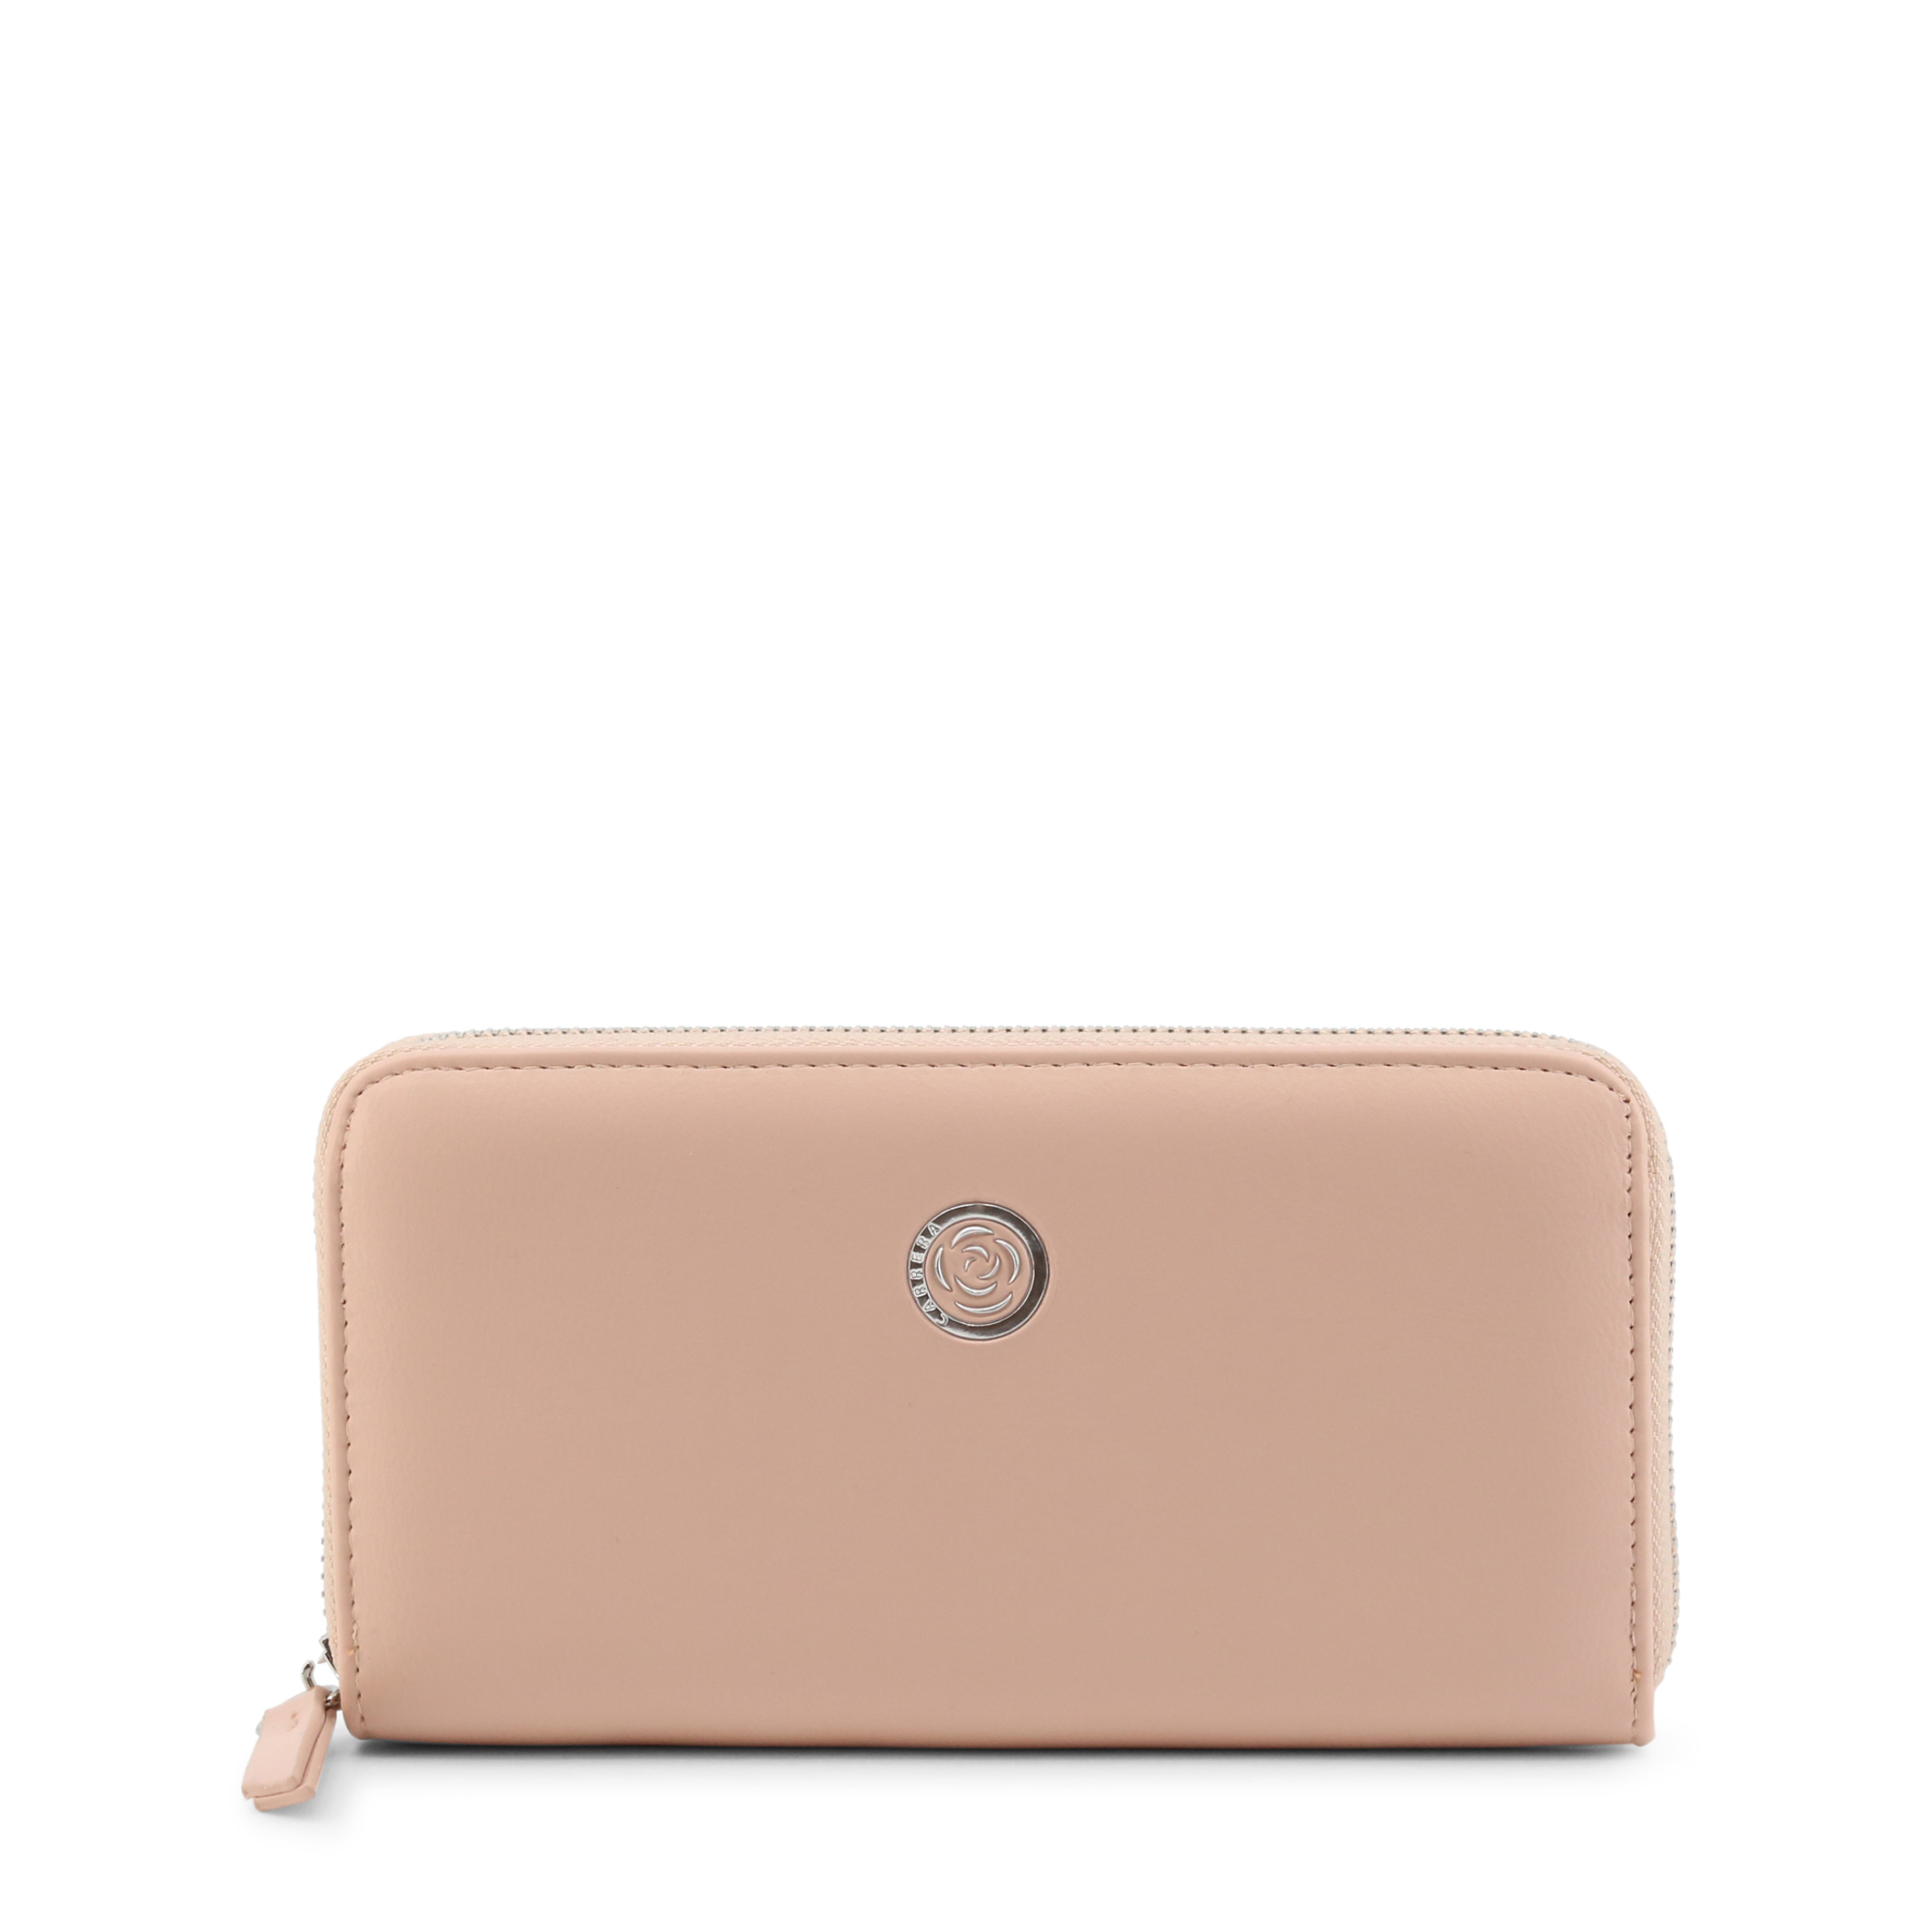 Carrera Jeans Pink Wallets for Women - SALLY_CB6011